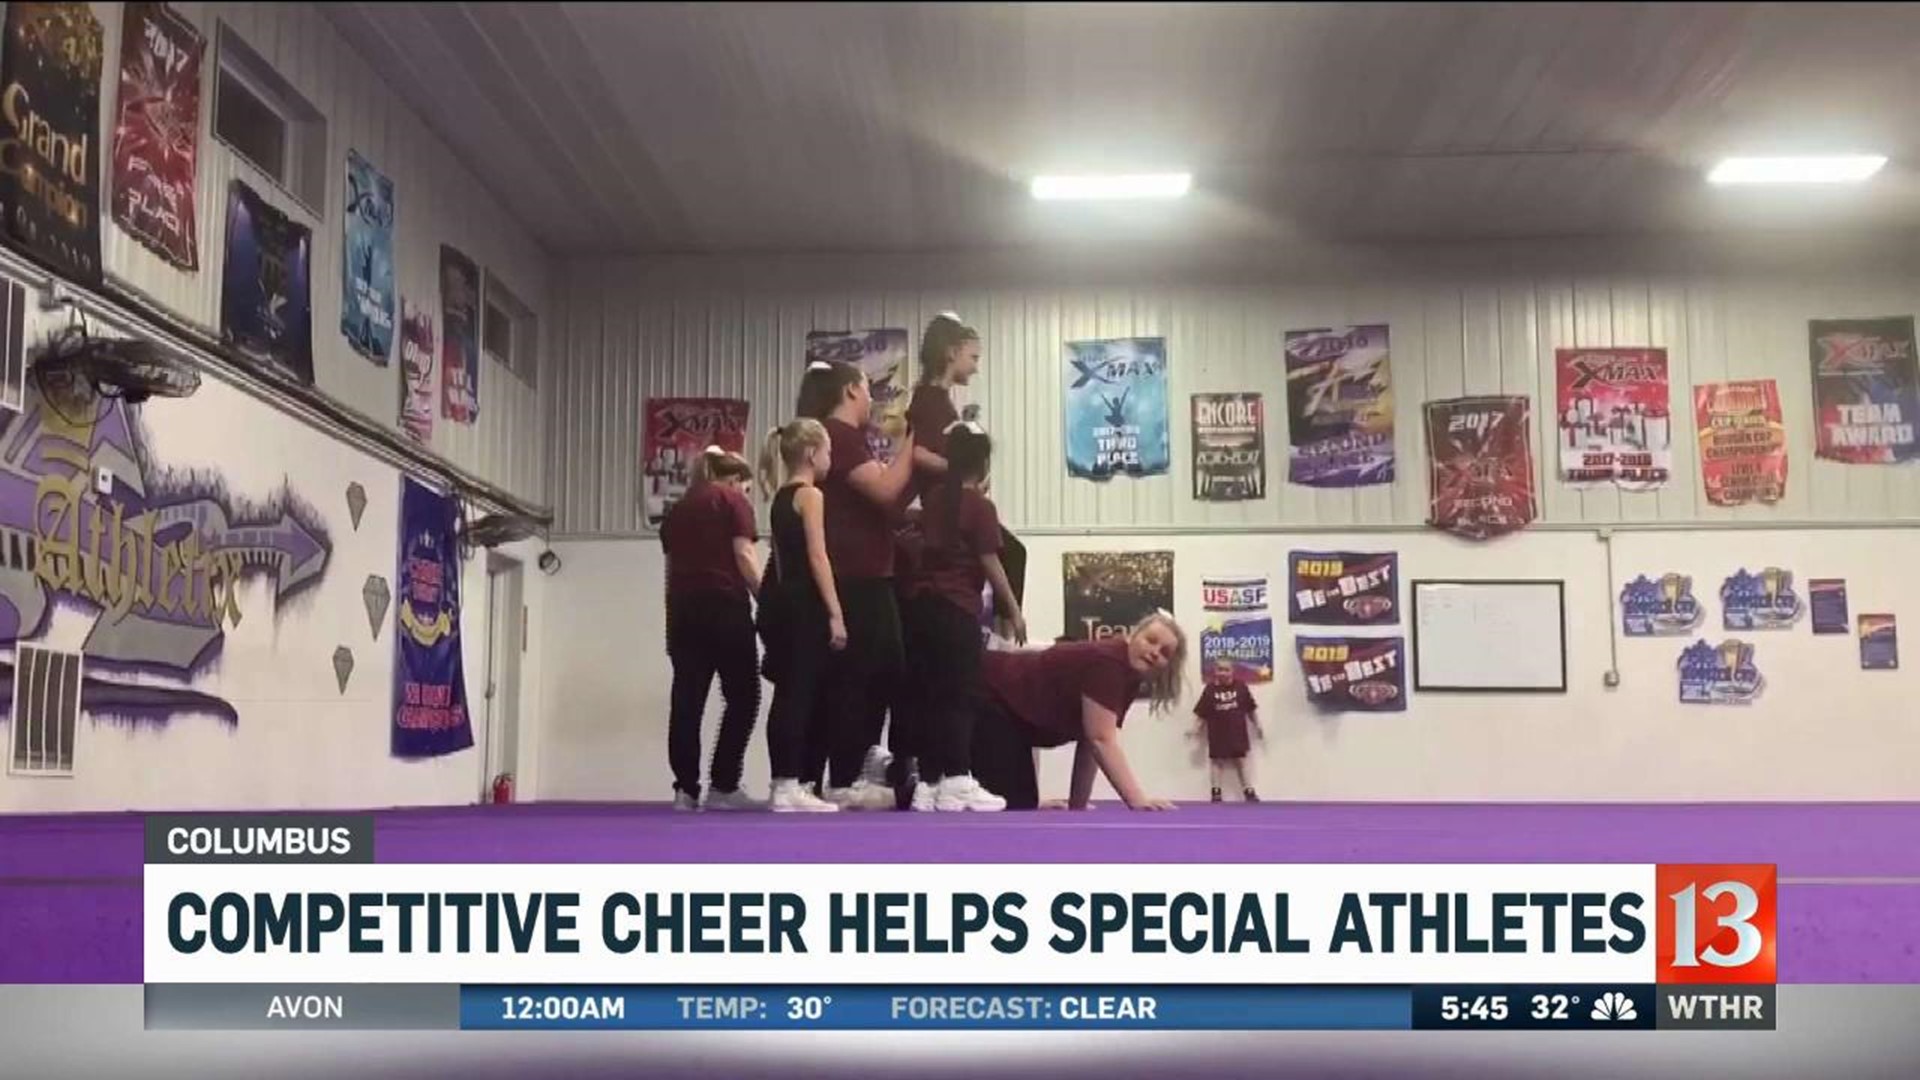 Competitive cheer helps special athletes